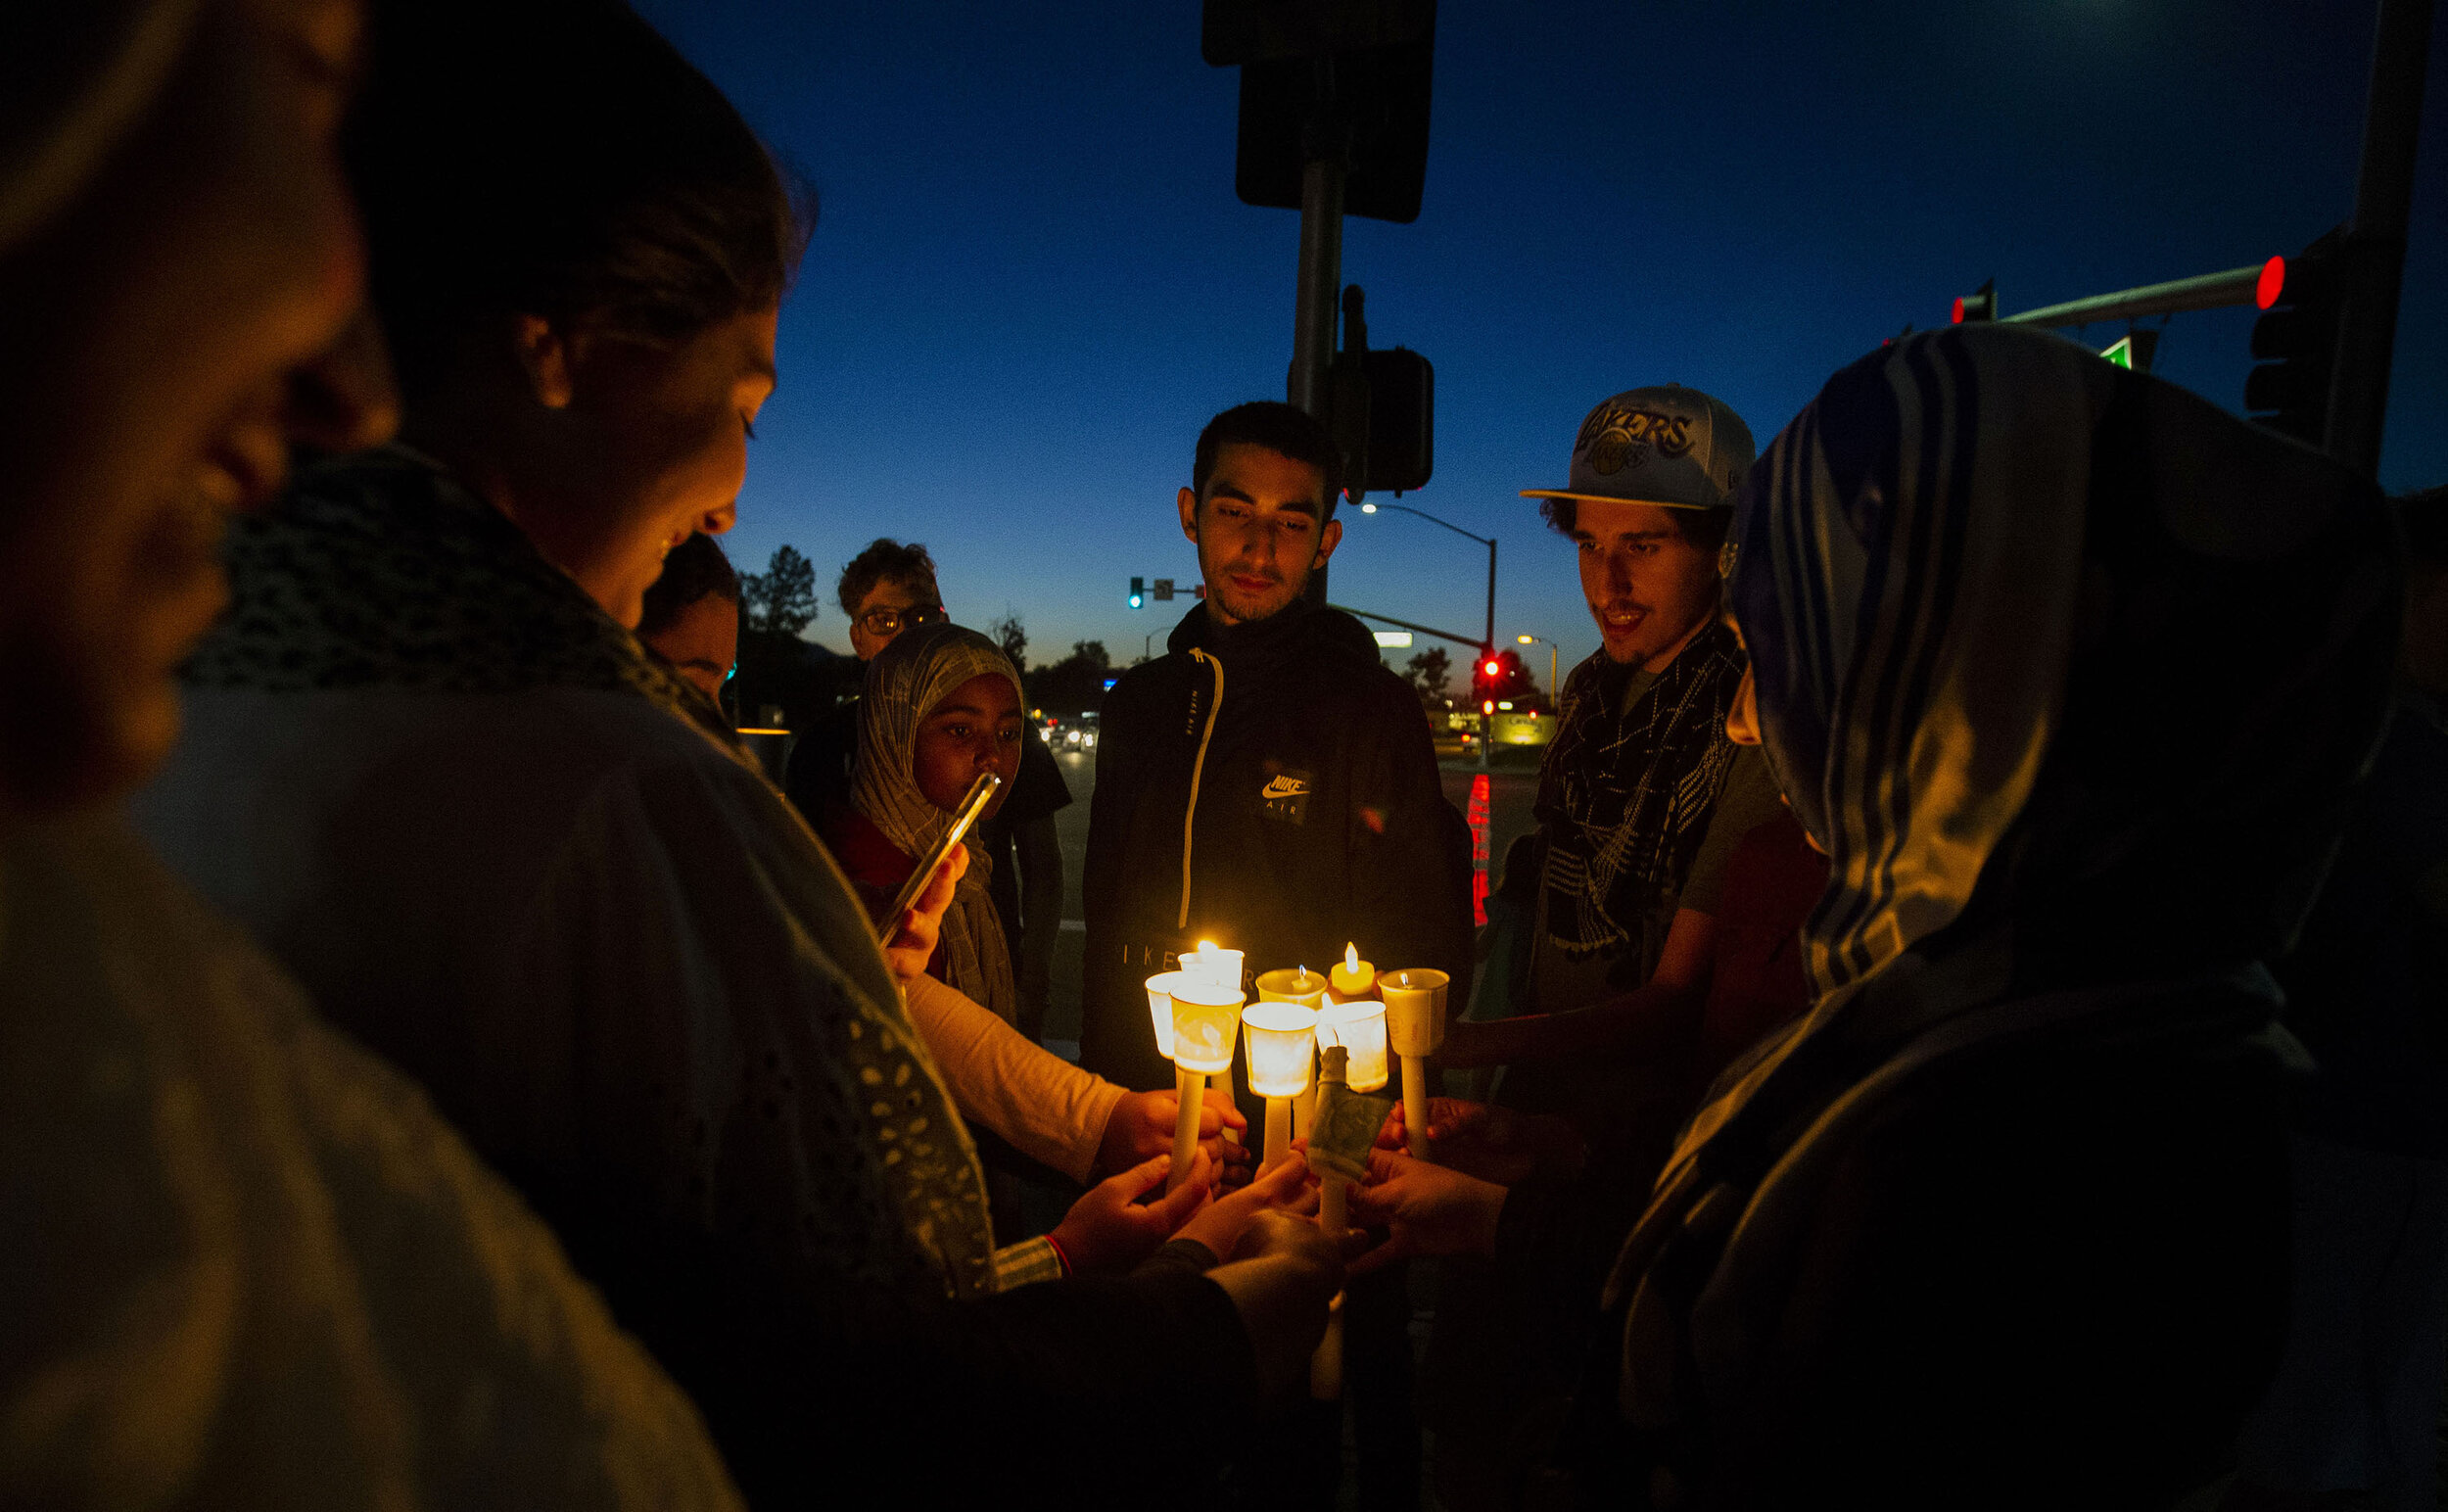  People come together as they call for a ban on assault-style rifles for personal use with the help of United Church of the Valley during a candlelight vigil to mourn the victims of the recent mass shootings in Dayton, Ohio, El Paso, and Gilroy at th